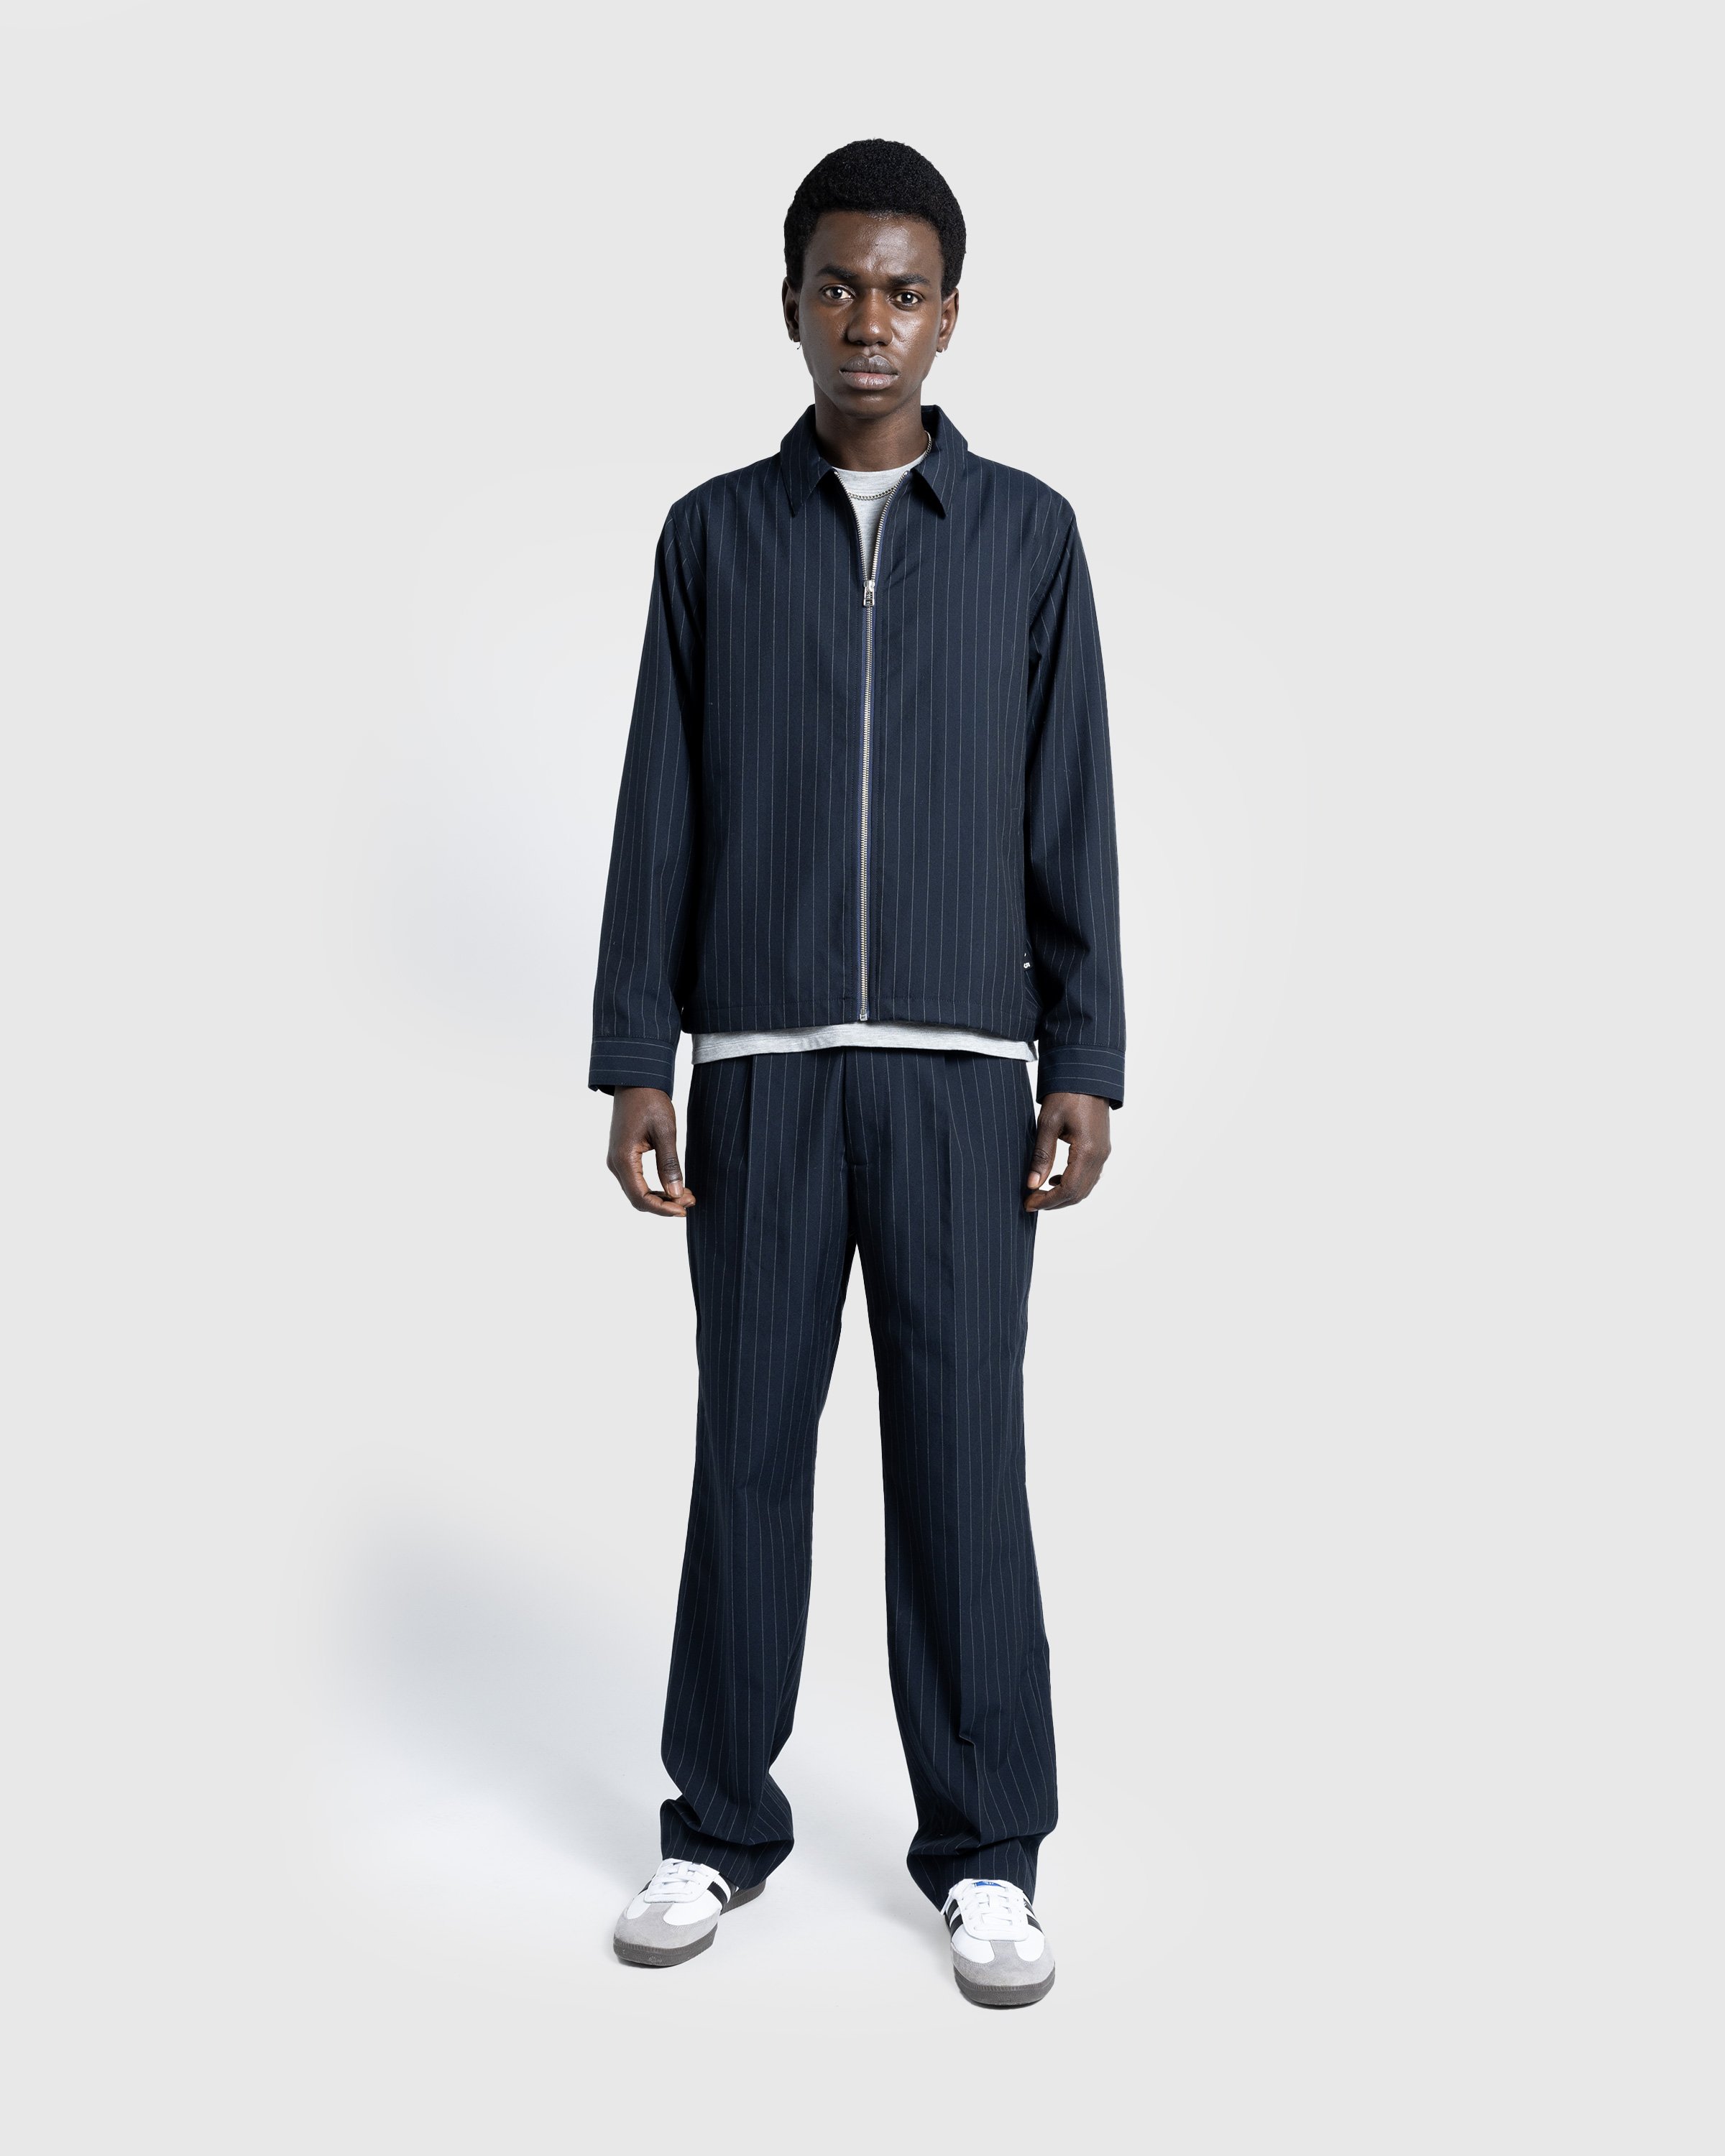 Highsnobiety HS05 - Tropical Suiting Jacket Stripes Navy - Clothing - Stripes Navy - Image 4